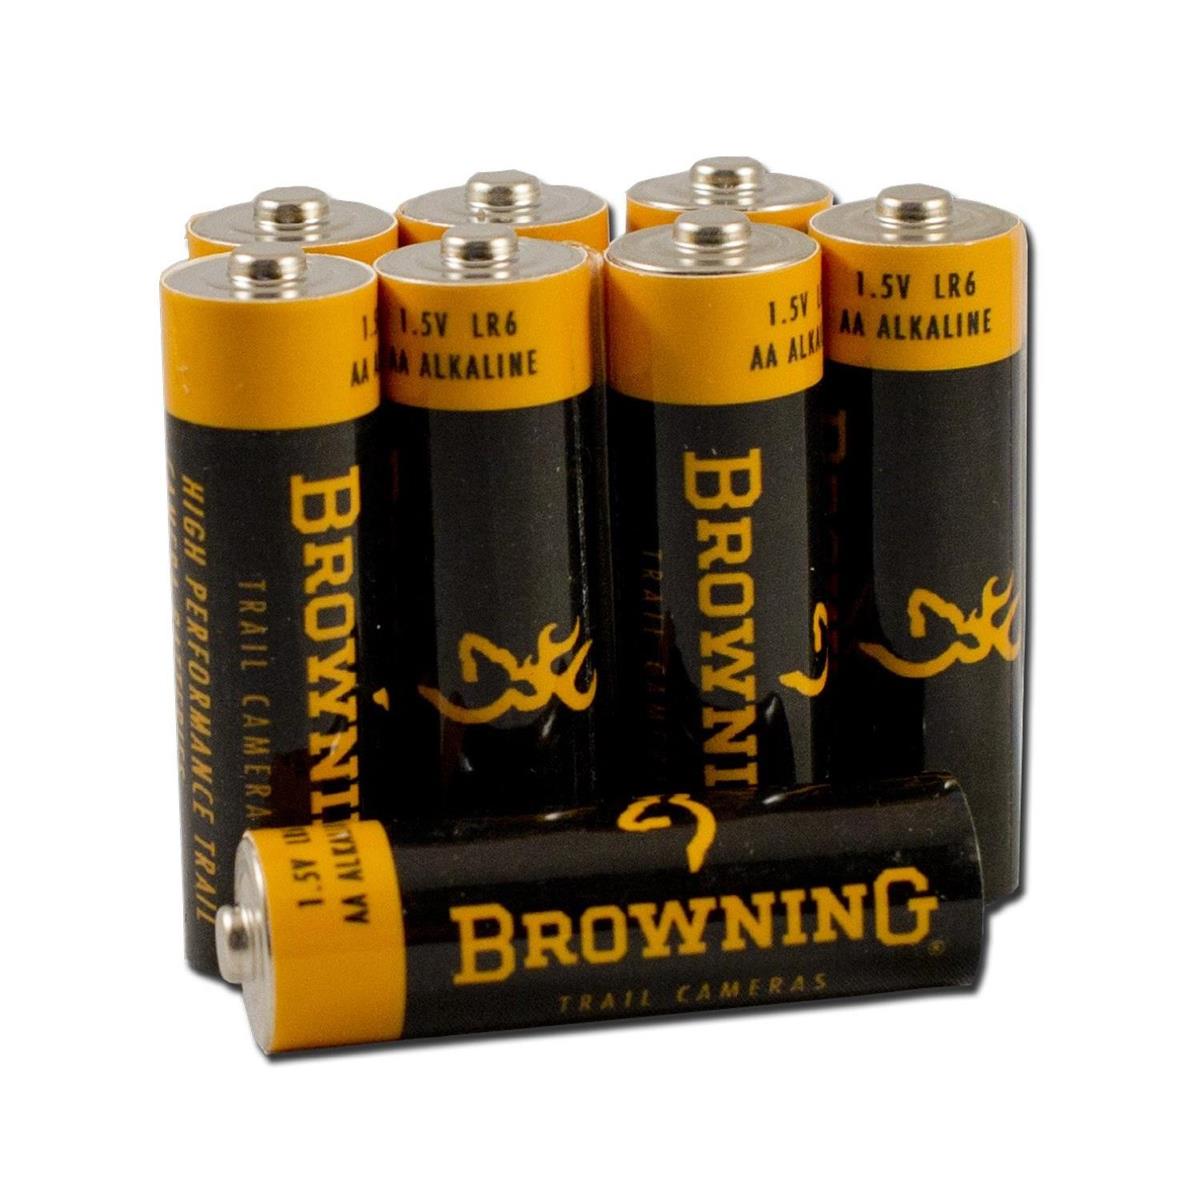 Image of Browning AA Alkaline Batteries for Trail Camera